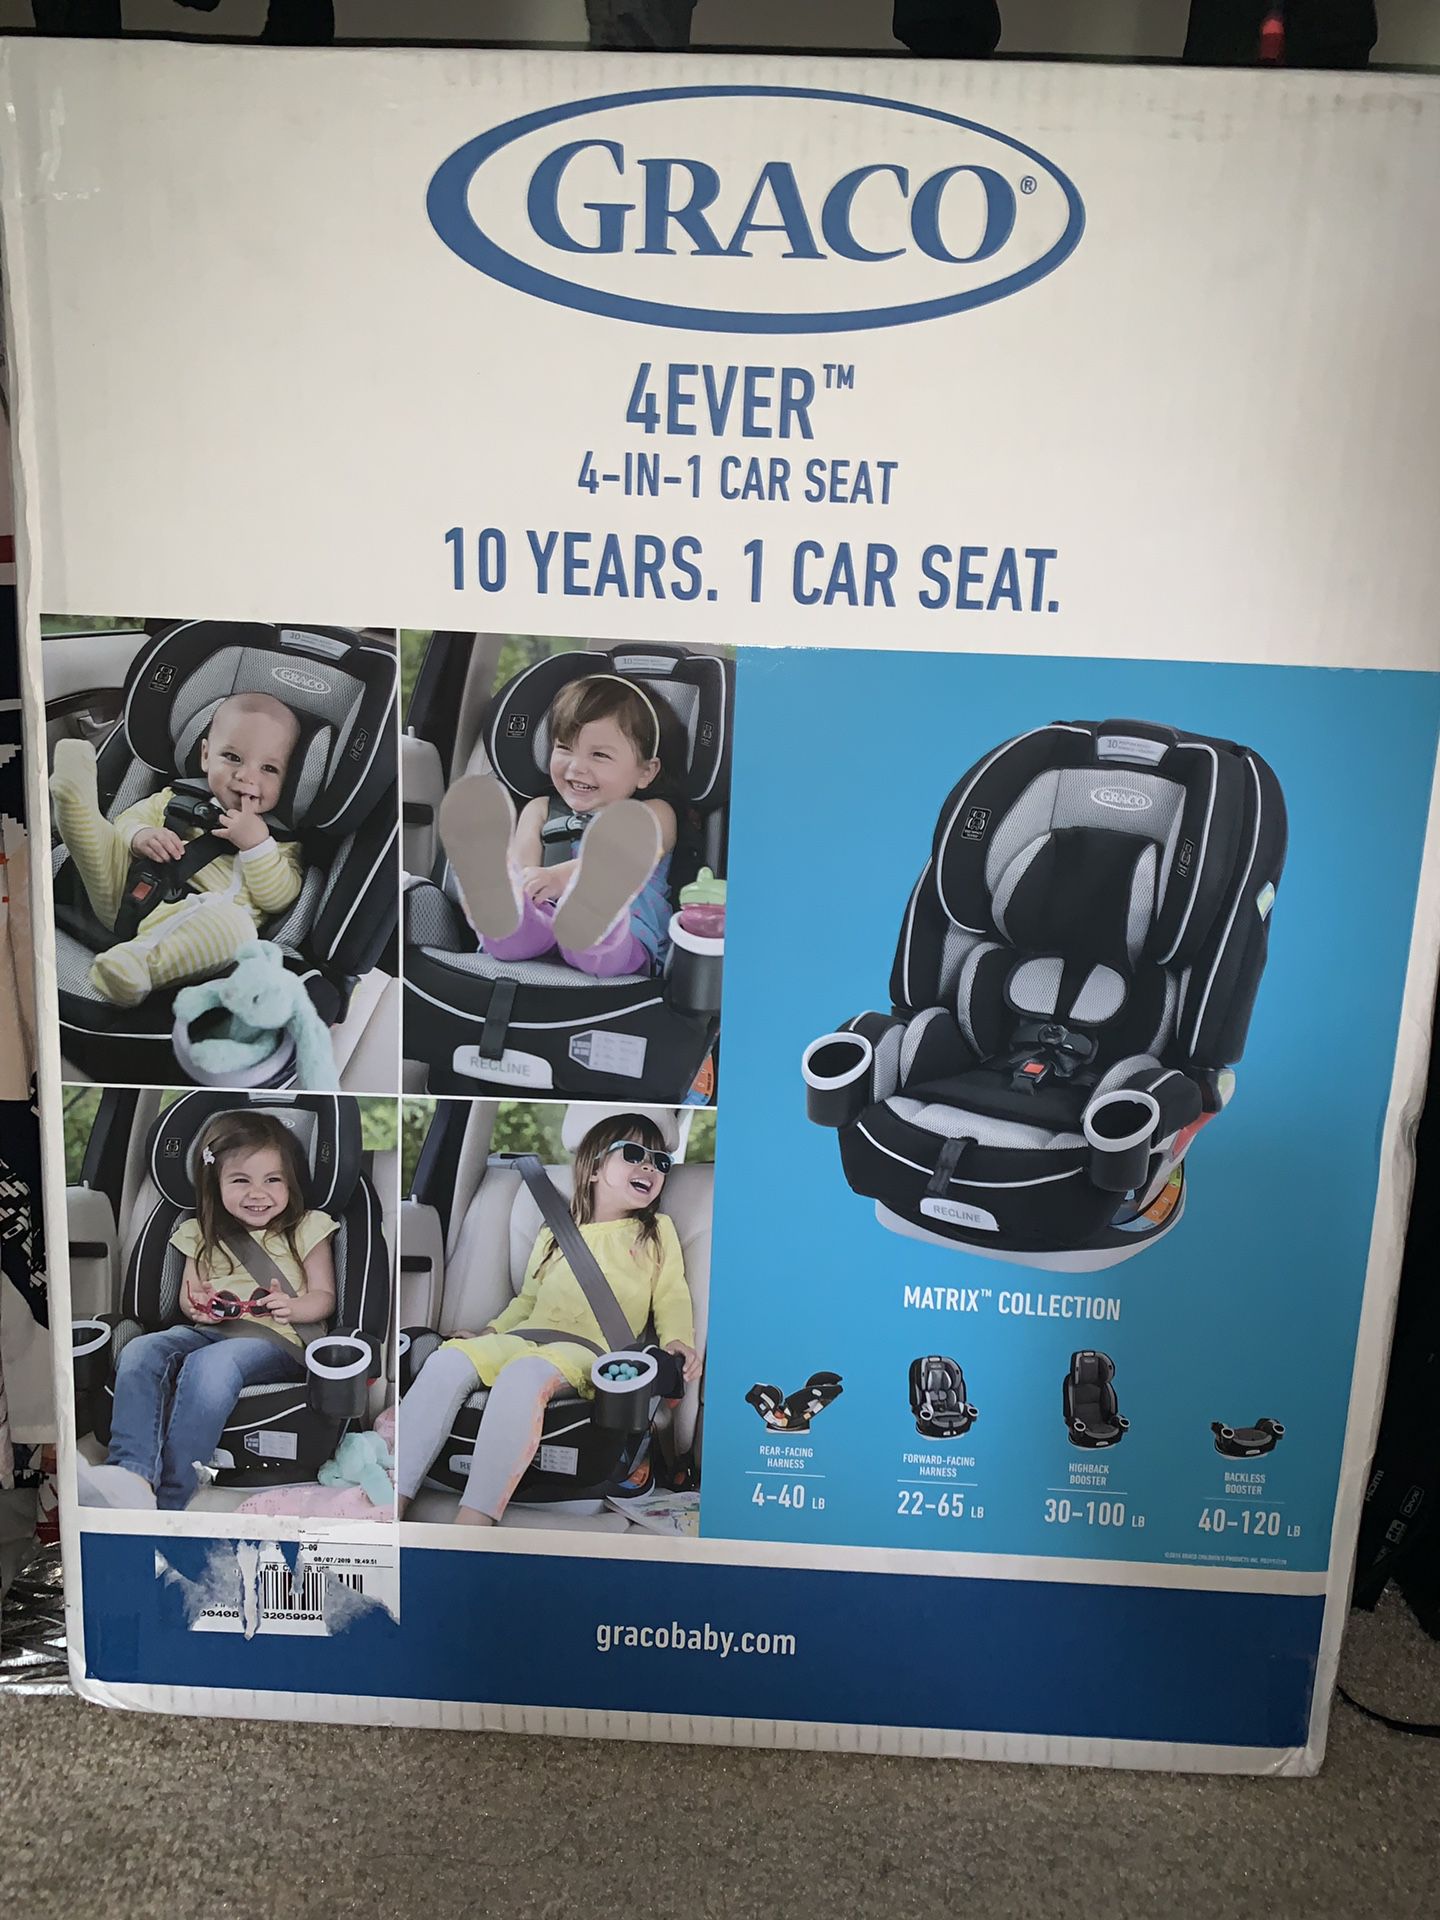 Brand new sealed Graco 4ever car seat